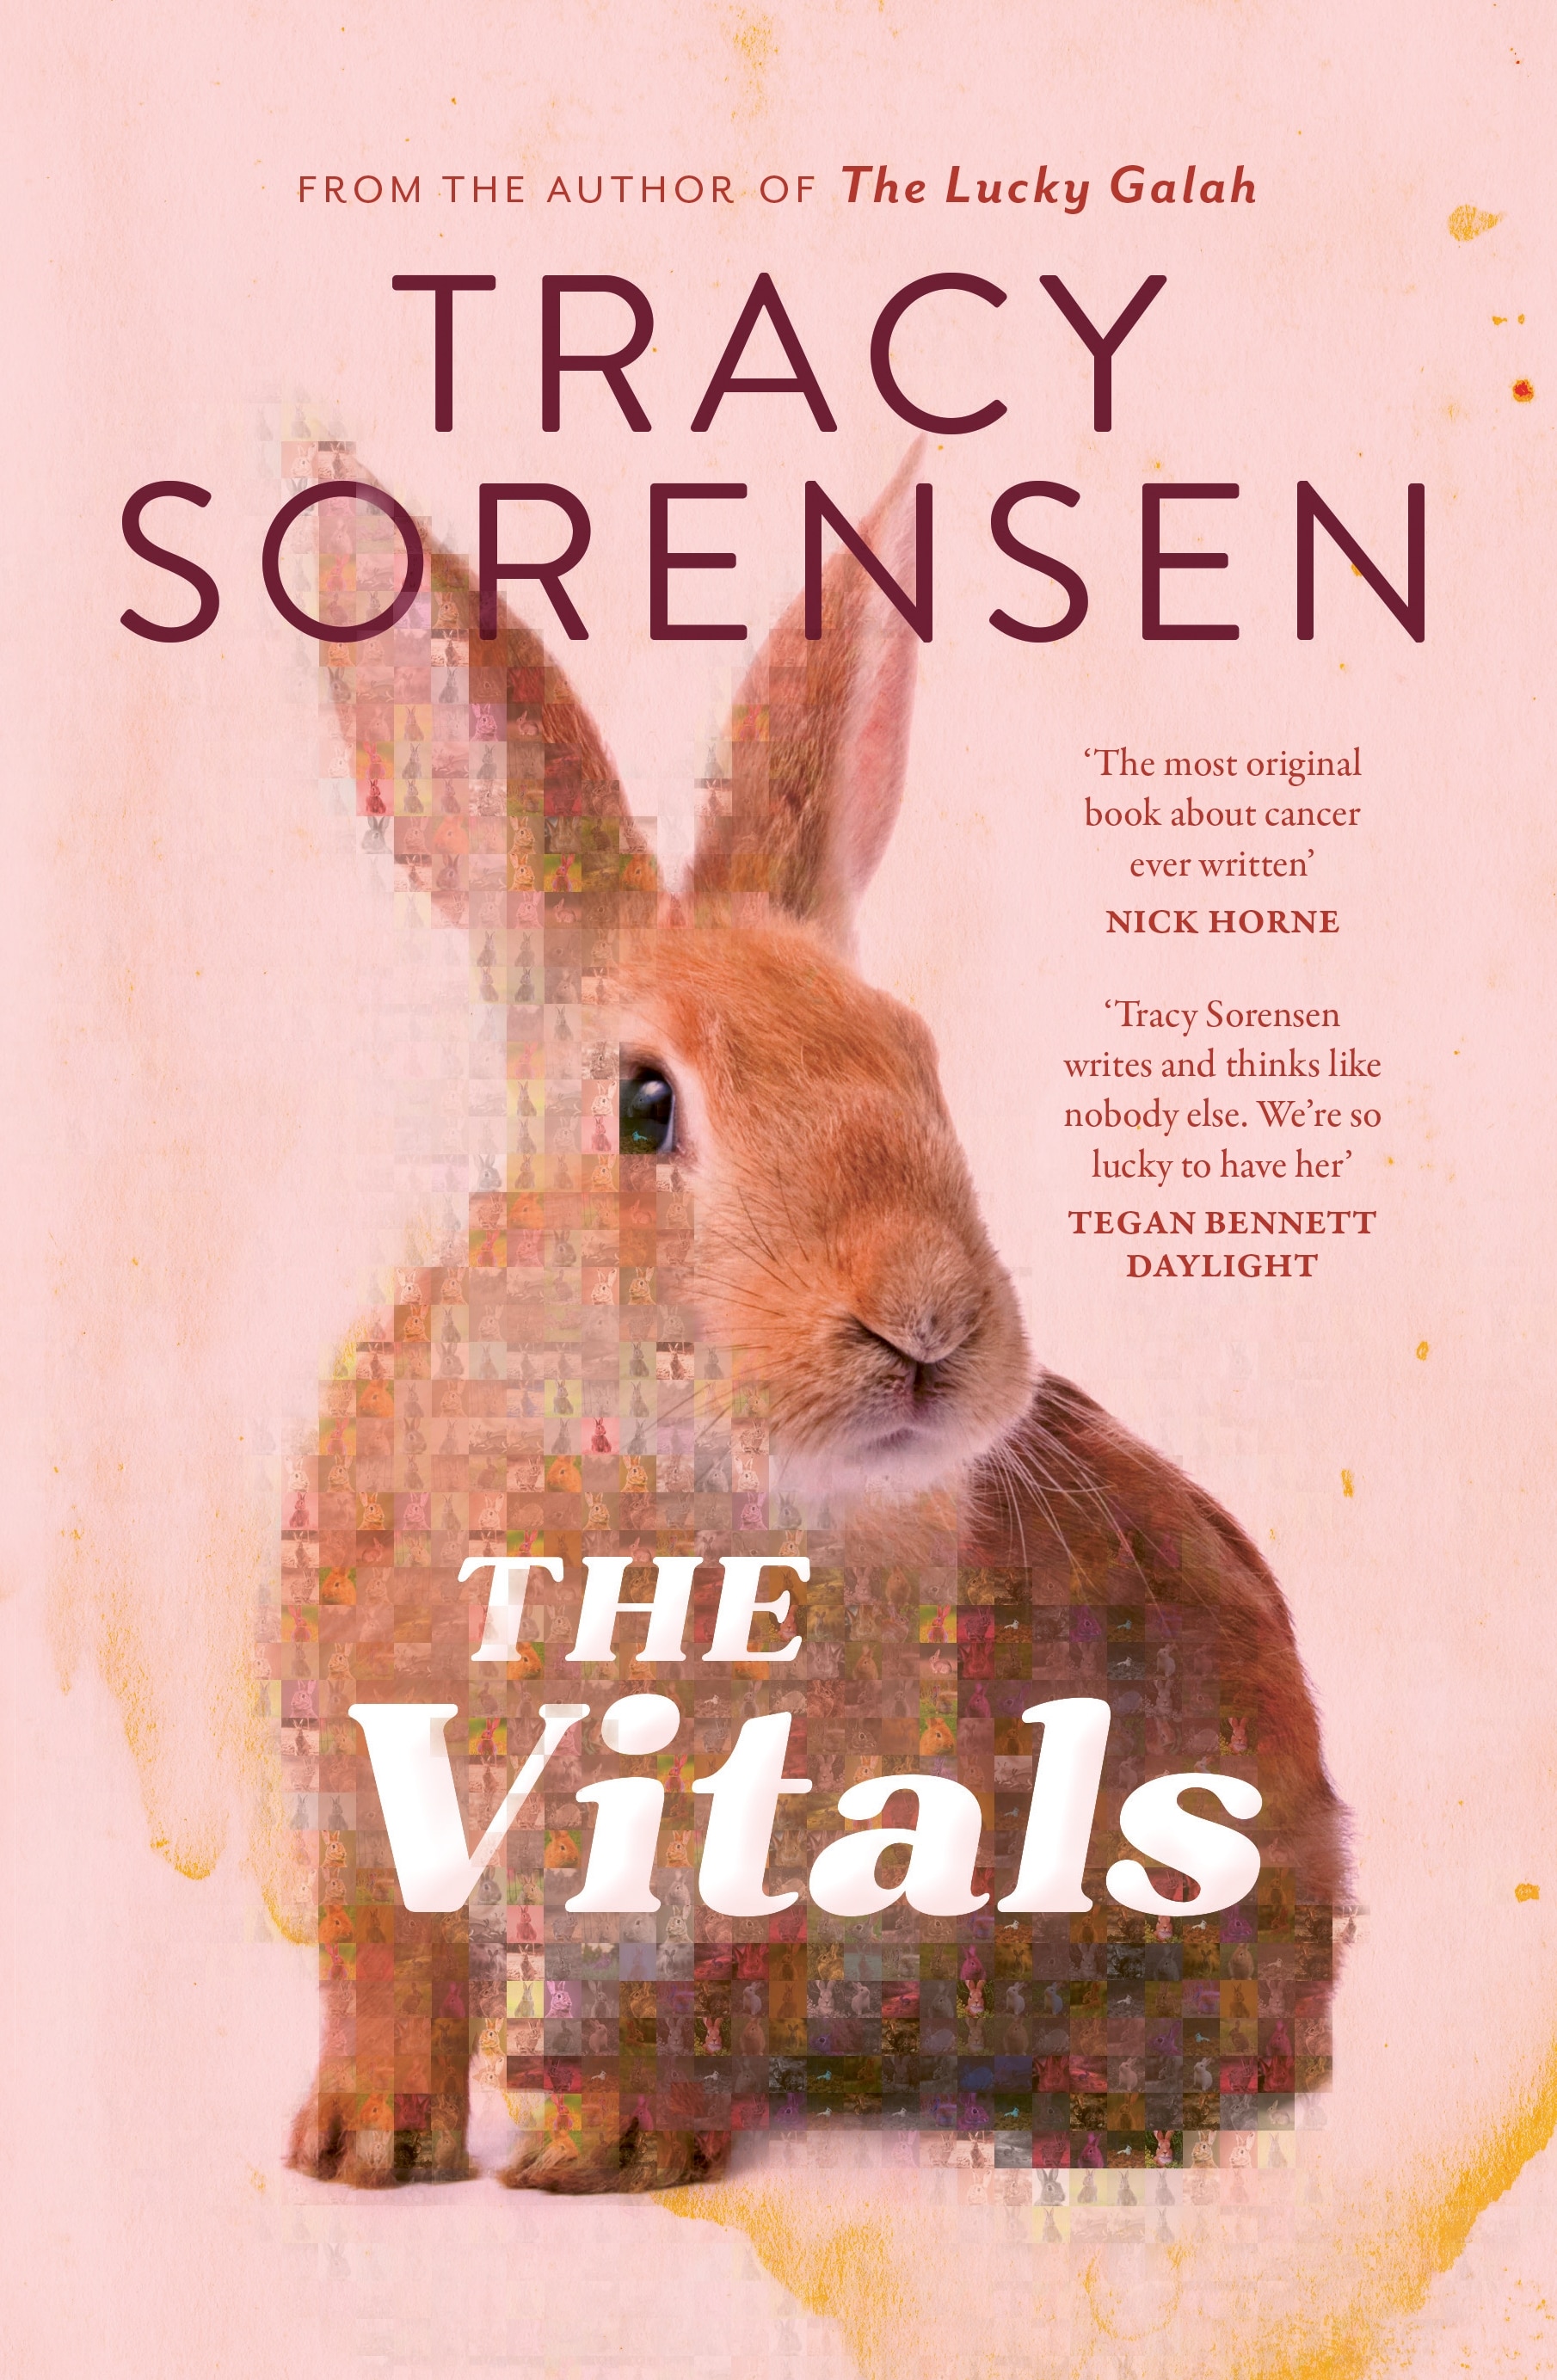 Image The Vitals by Tracy Sorensen, with a cover image of a pixelated brown rabbit with a pink background